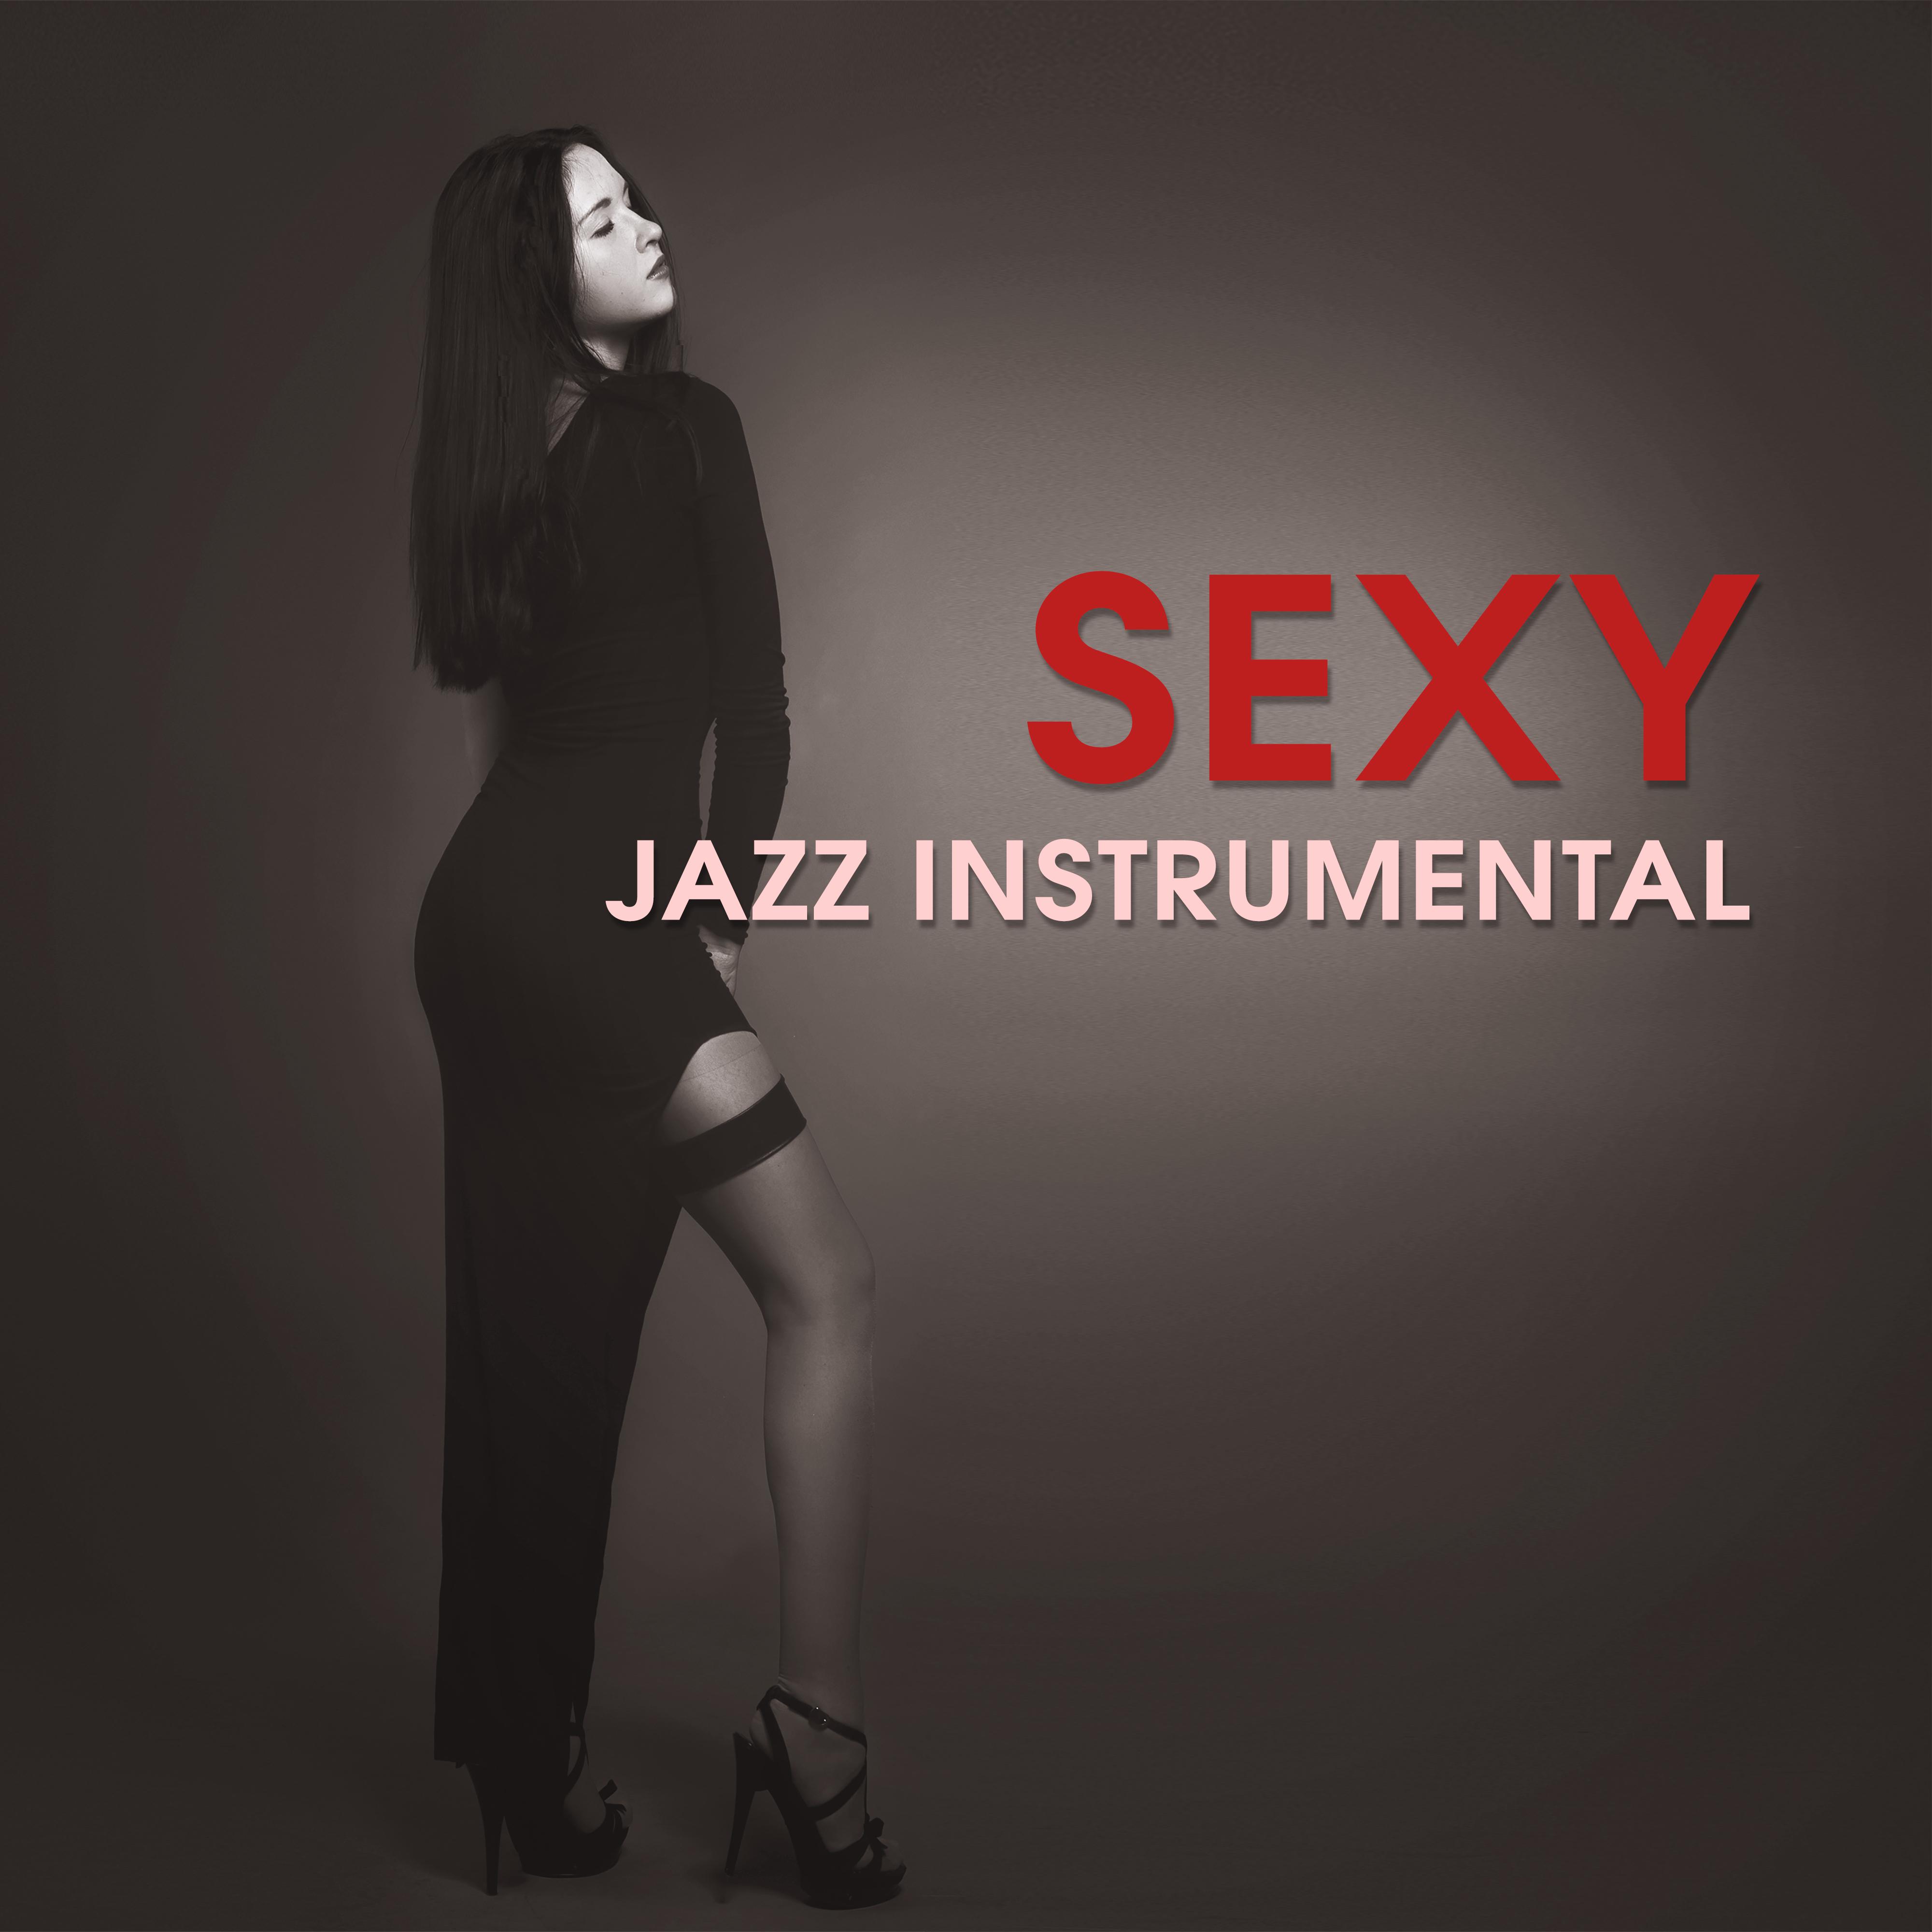 **** Jazz Instrumental – Saxophone Sounds, Romantic Music, Peaceful Jazz Instrumental, Piano in the Background